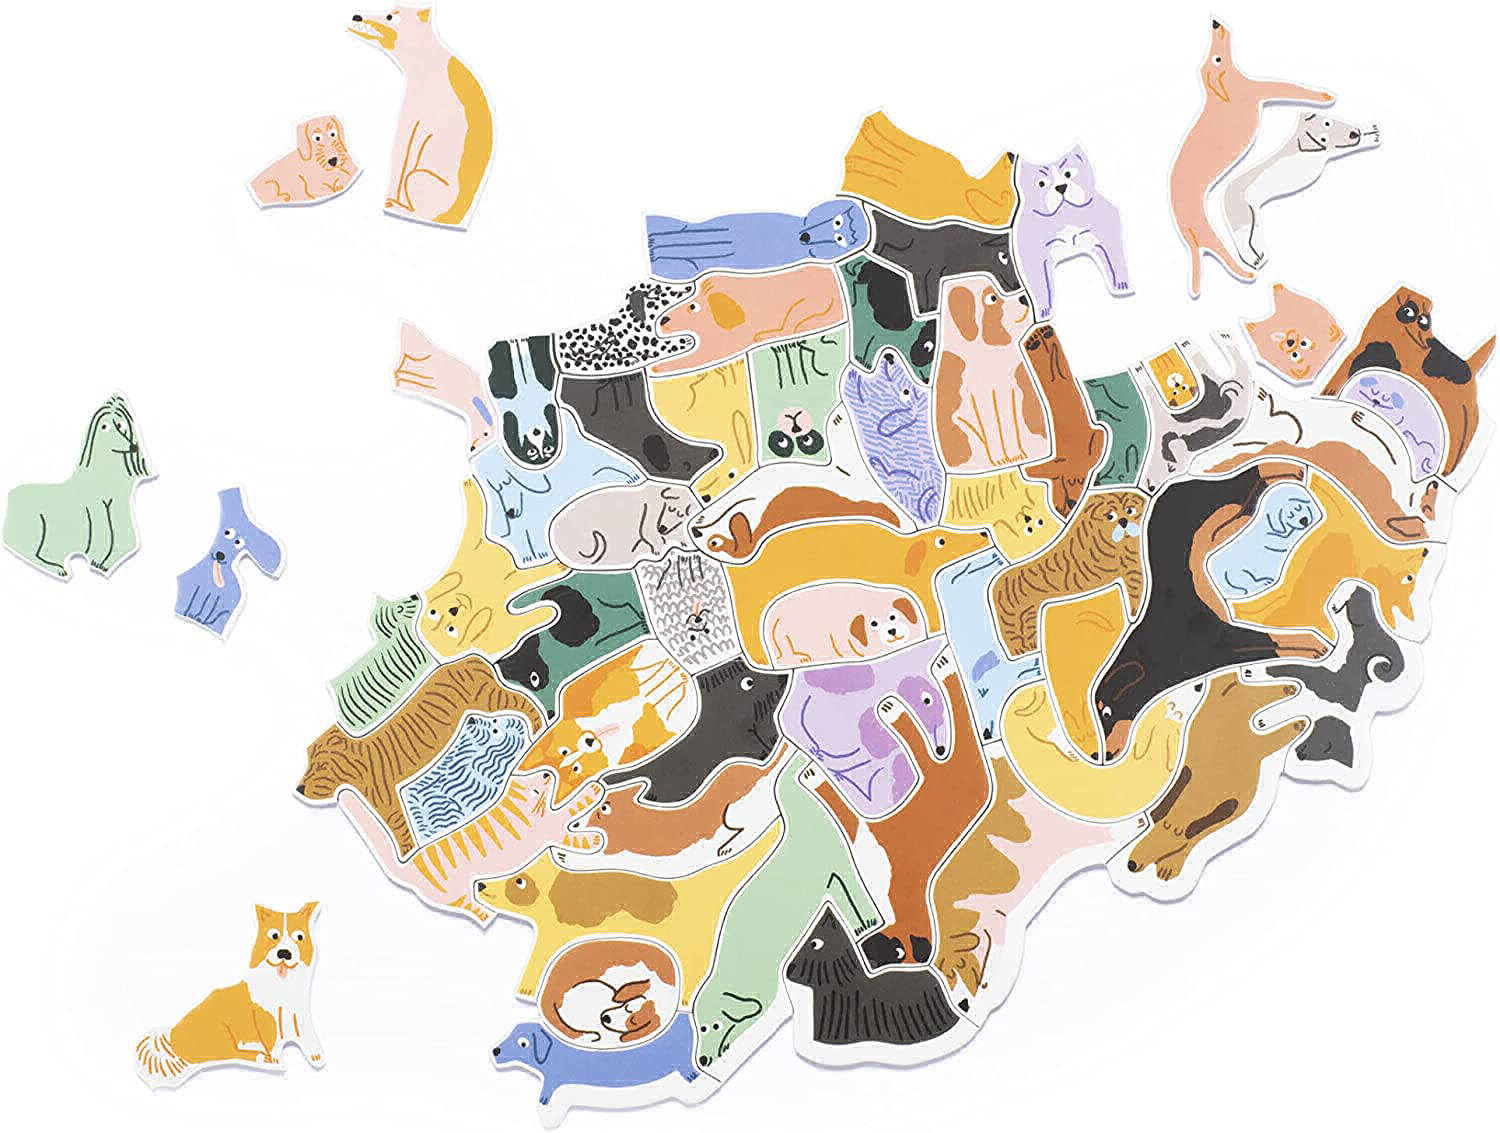 299 Dogs and a Cat: A Canine Cluster Puzzle - Deb's Hidden Treasures